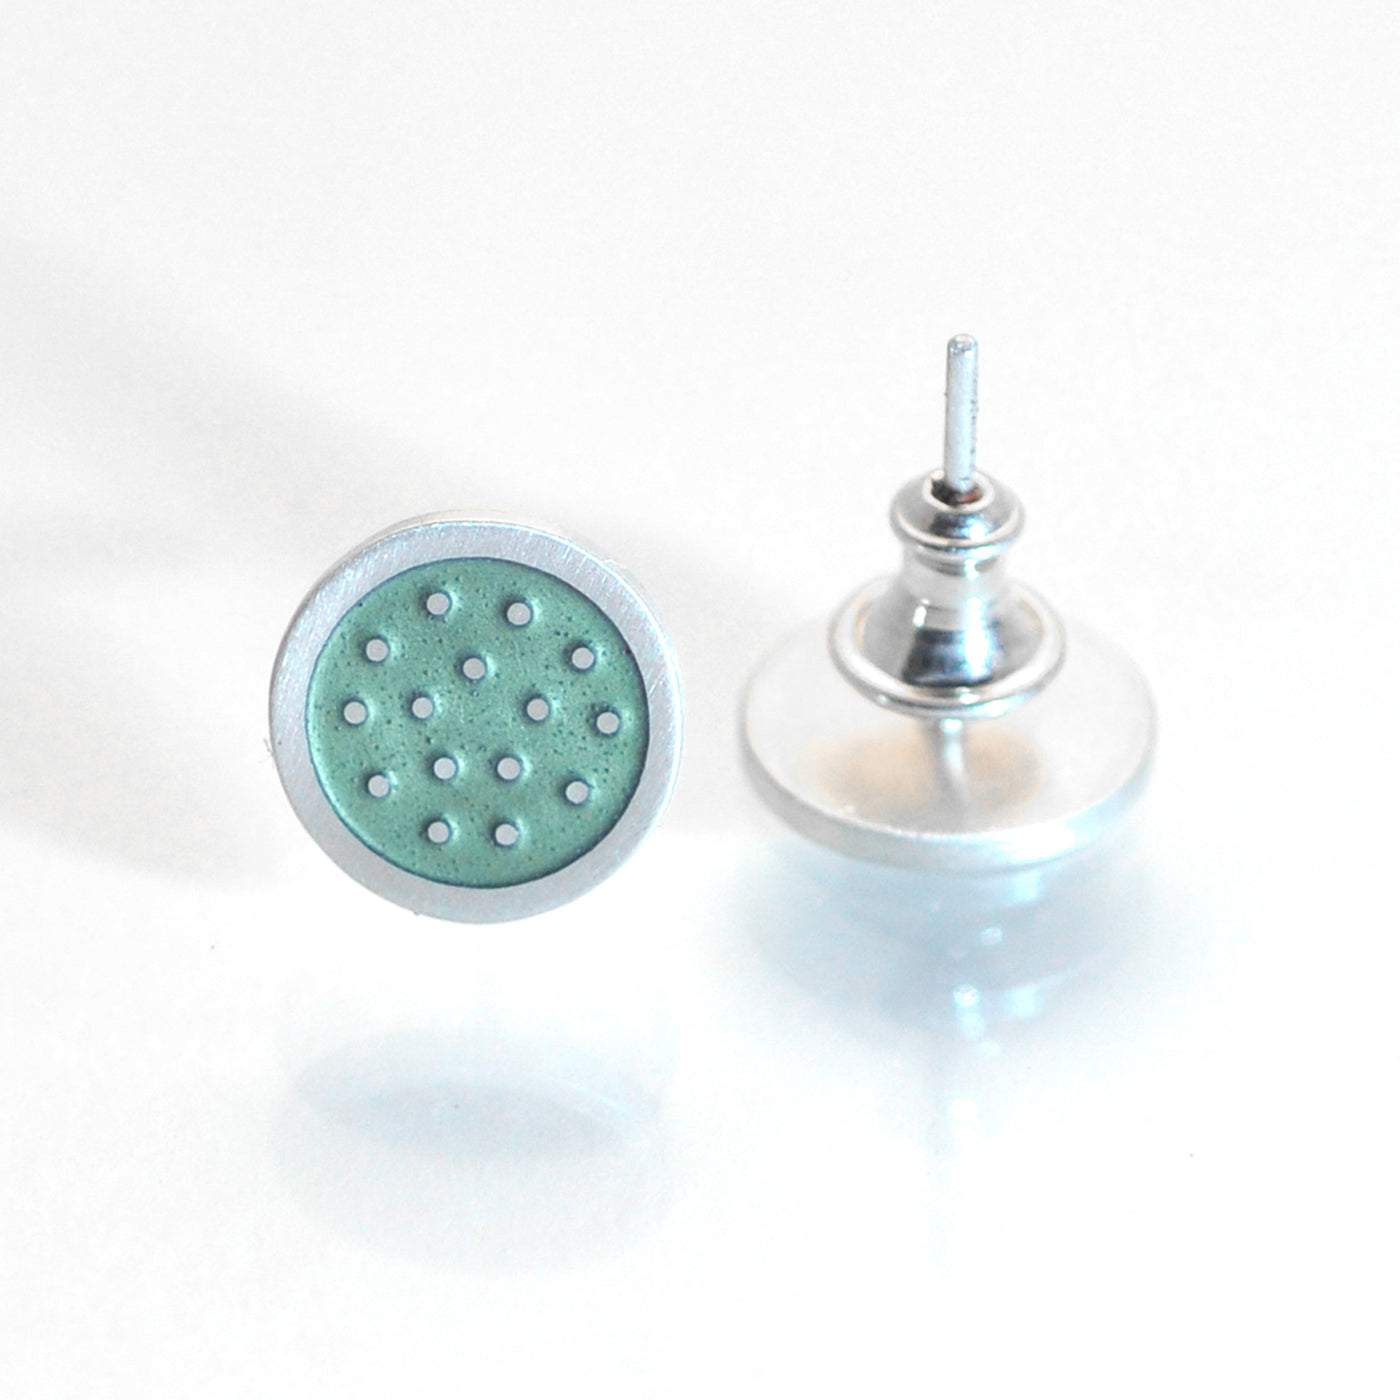 Dotty silver and enamelled ear studs, green grey small